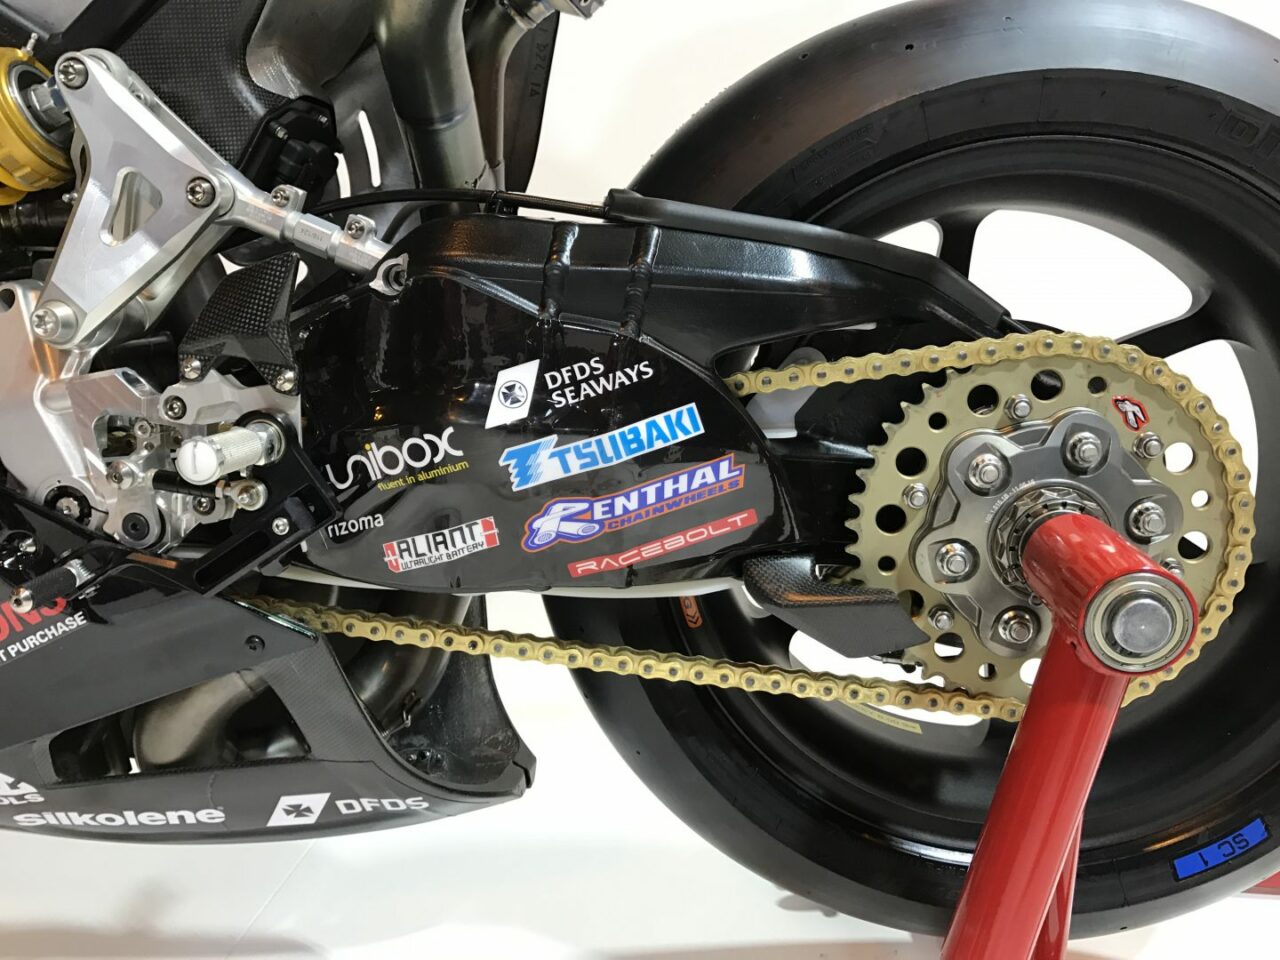 surface rust on motorcycle chain